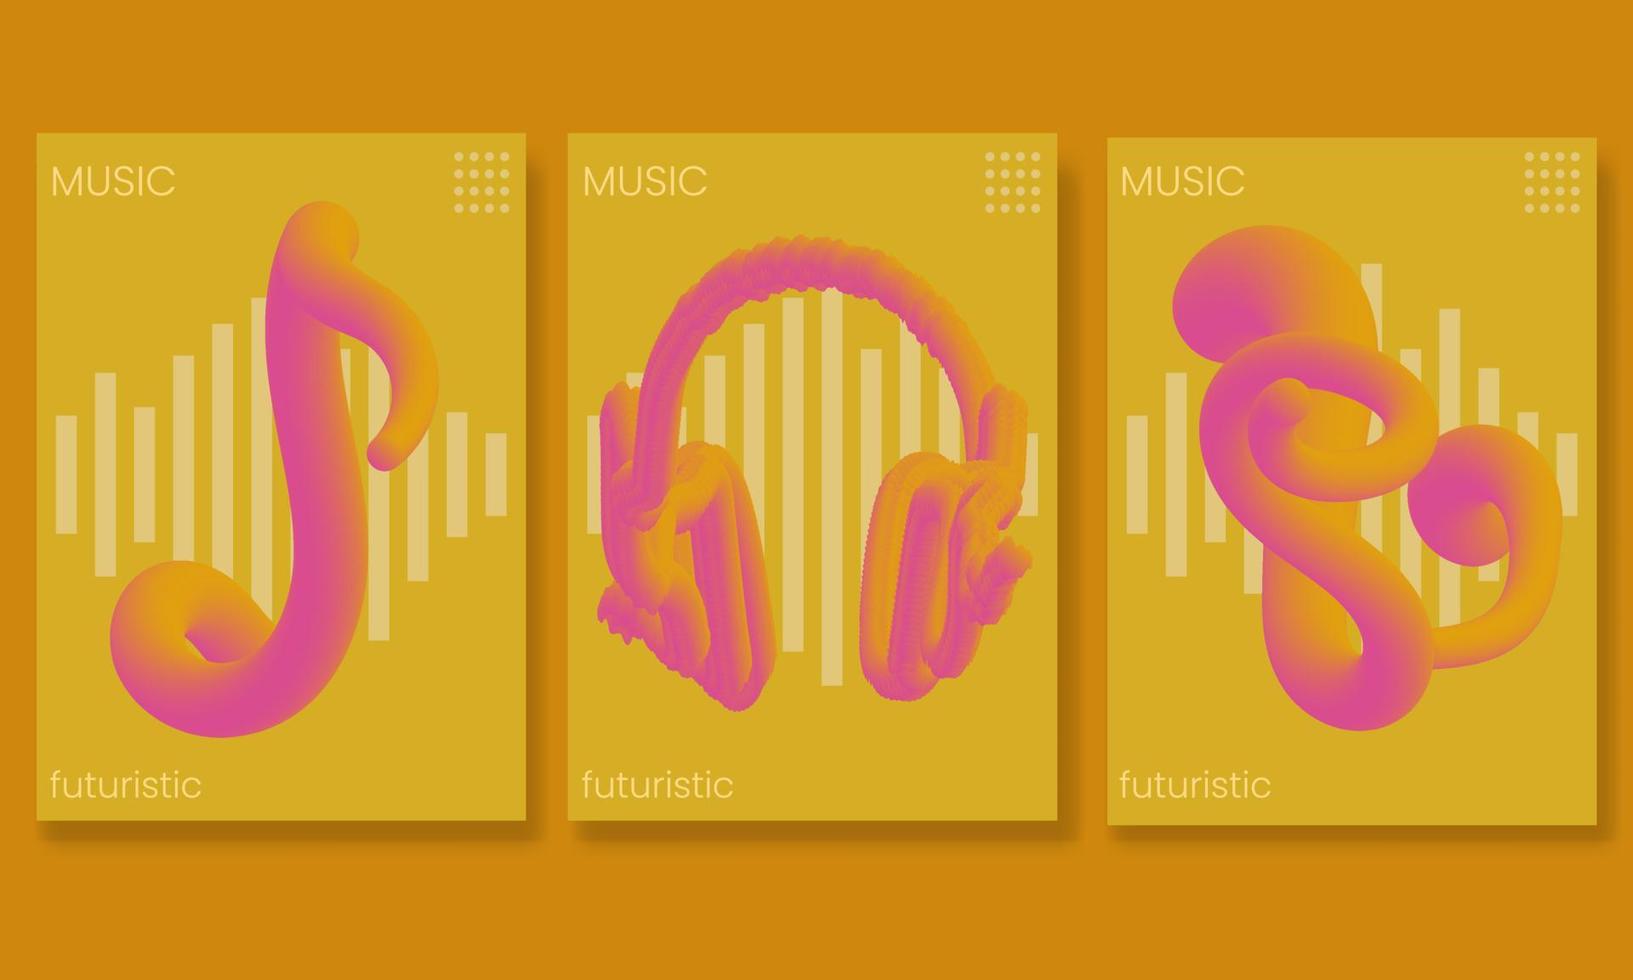 Futuristic, trendy music cover . Applicable for party event, music fest, audio branding, advertising etc vector